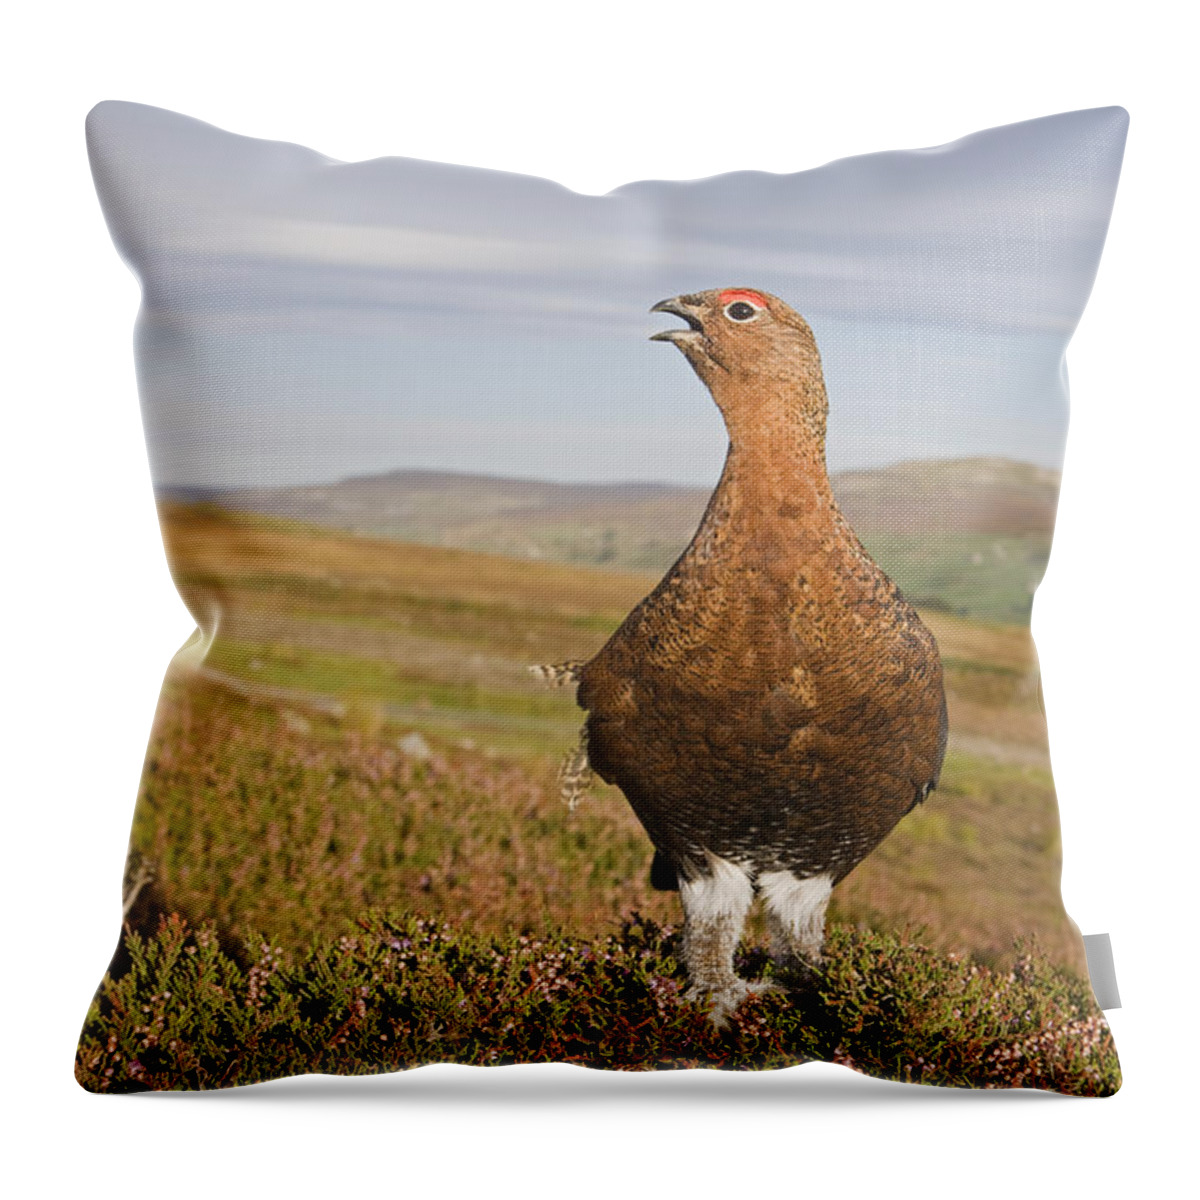 Flpa Throw Pillow featuring the photograph Male Red Grouse Calling On Moorland by Dickie Duckett